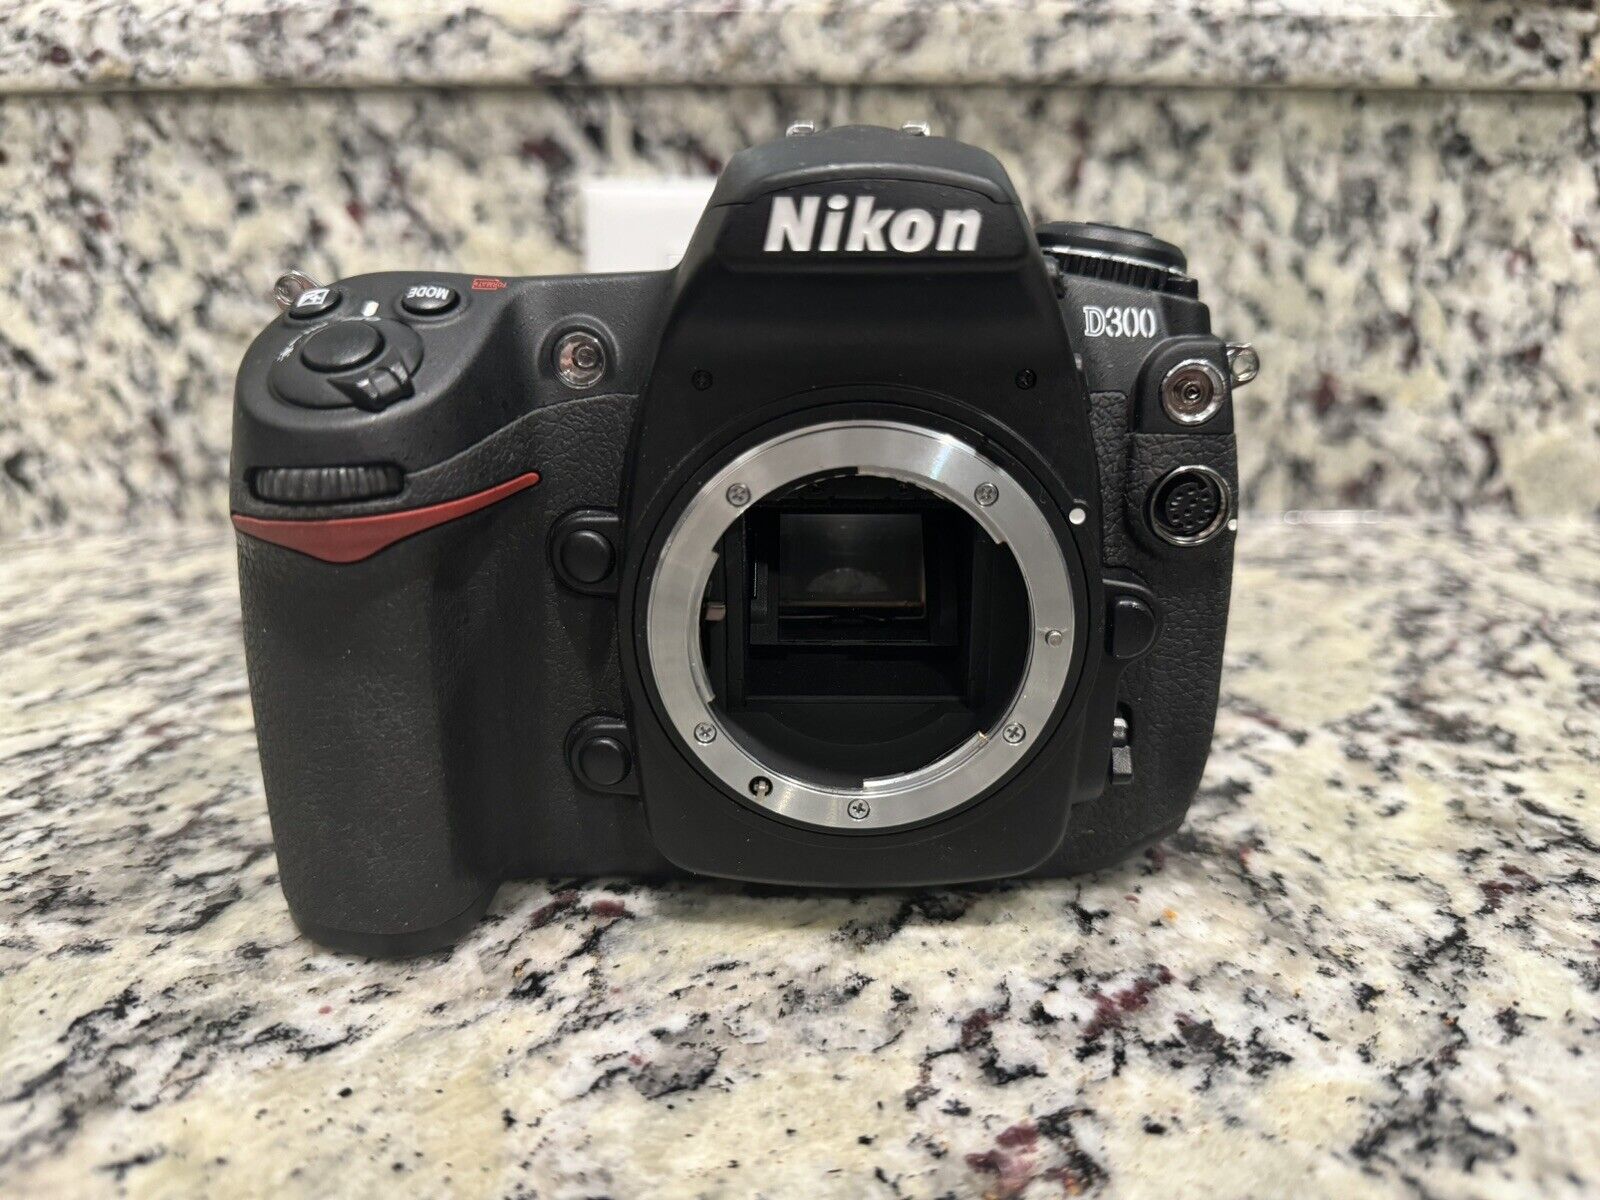 Nikon D300S 12.3 MP Digital SLR Camera - Black - POWER TESTED ONLY. SOLD AS IS‼️